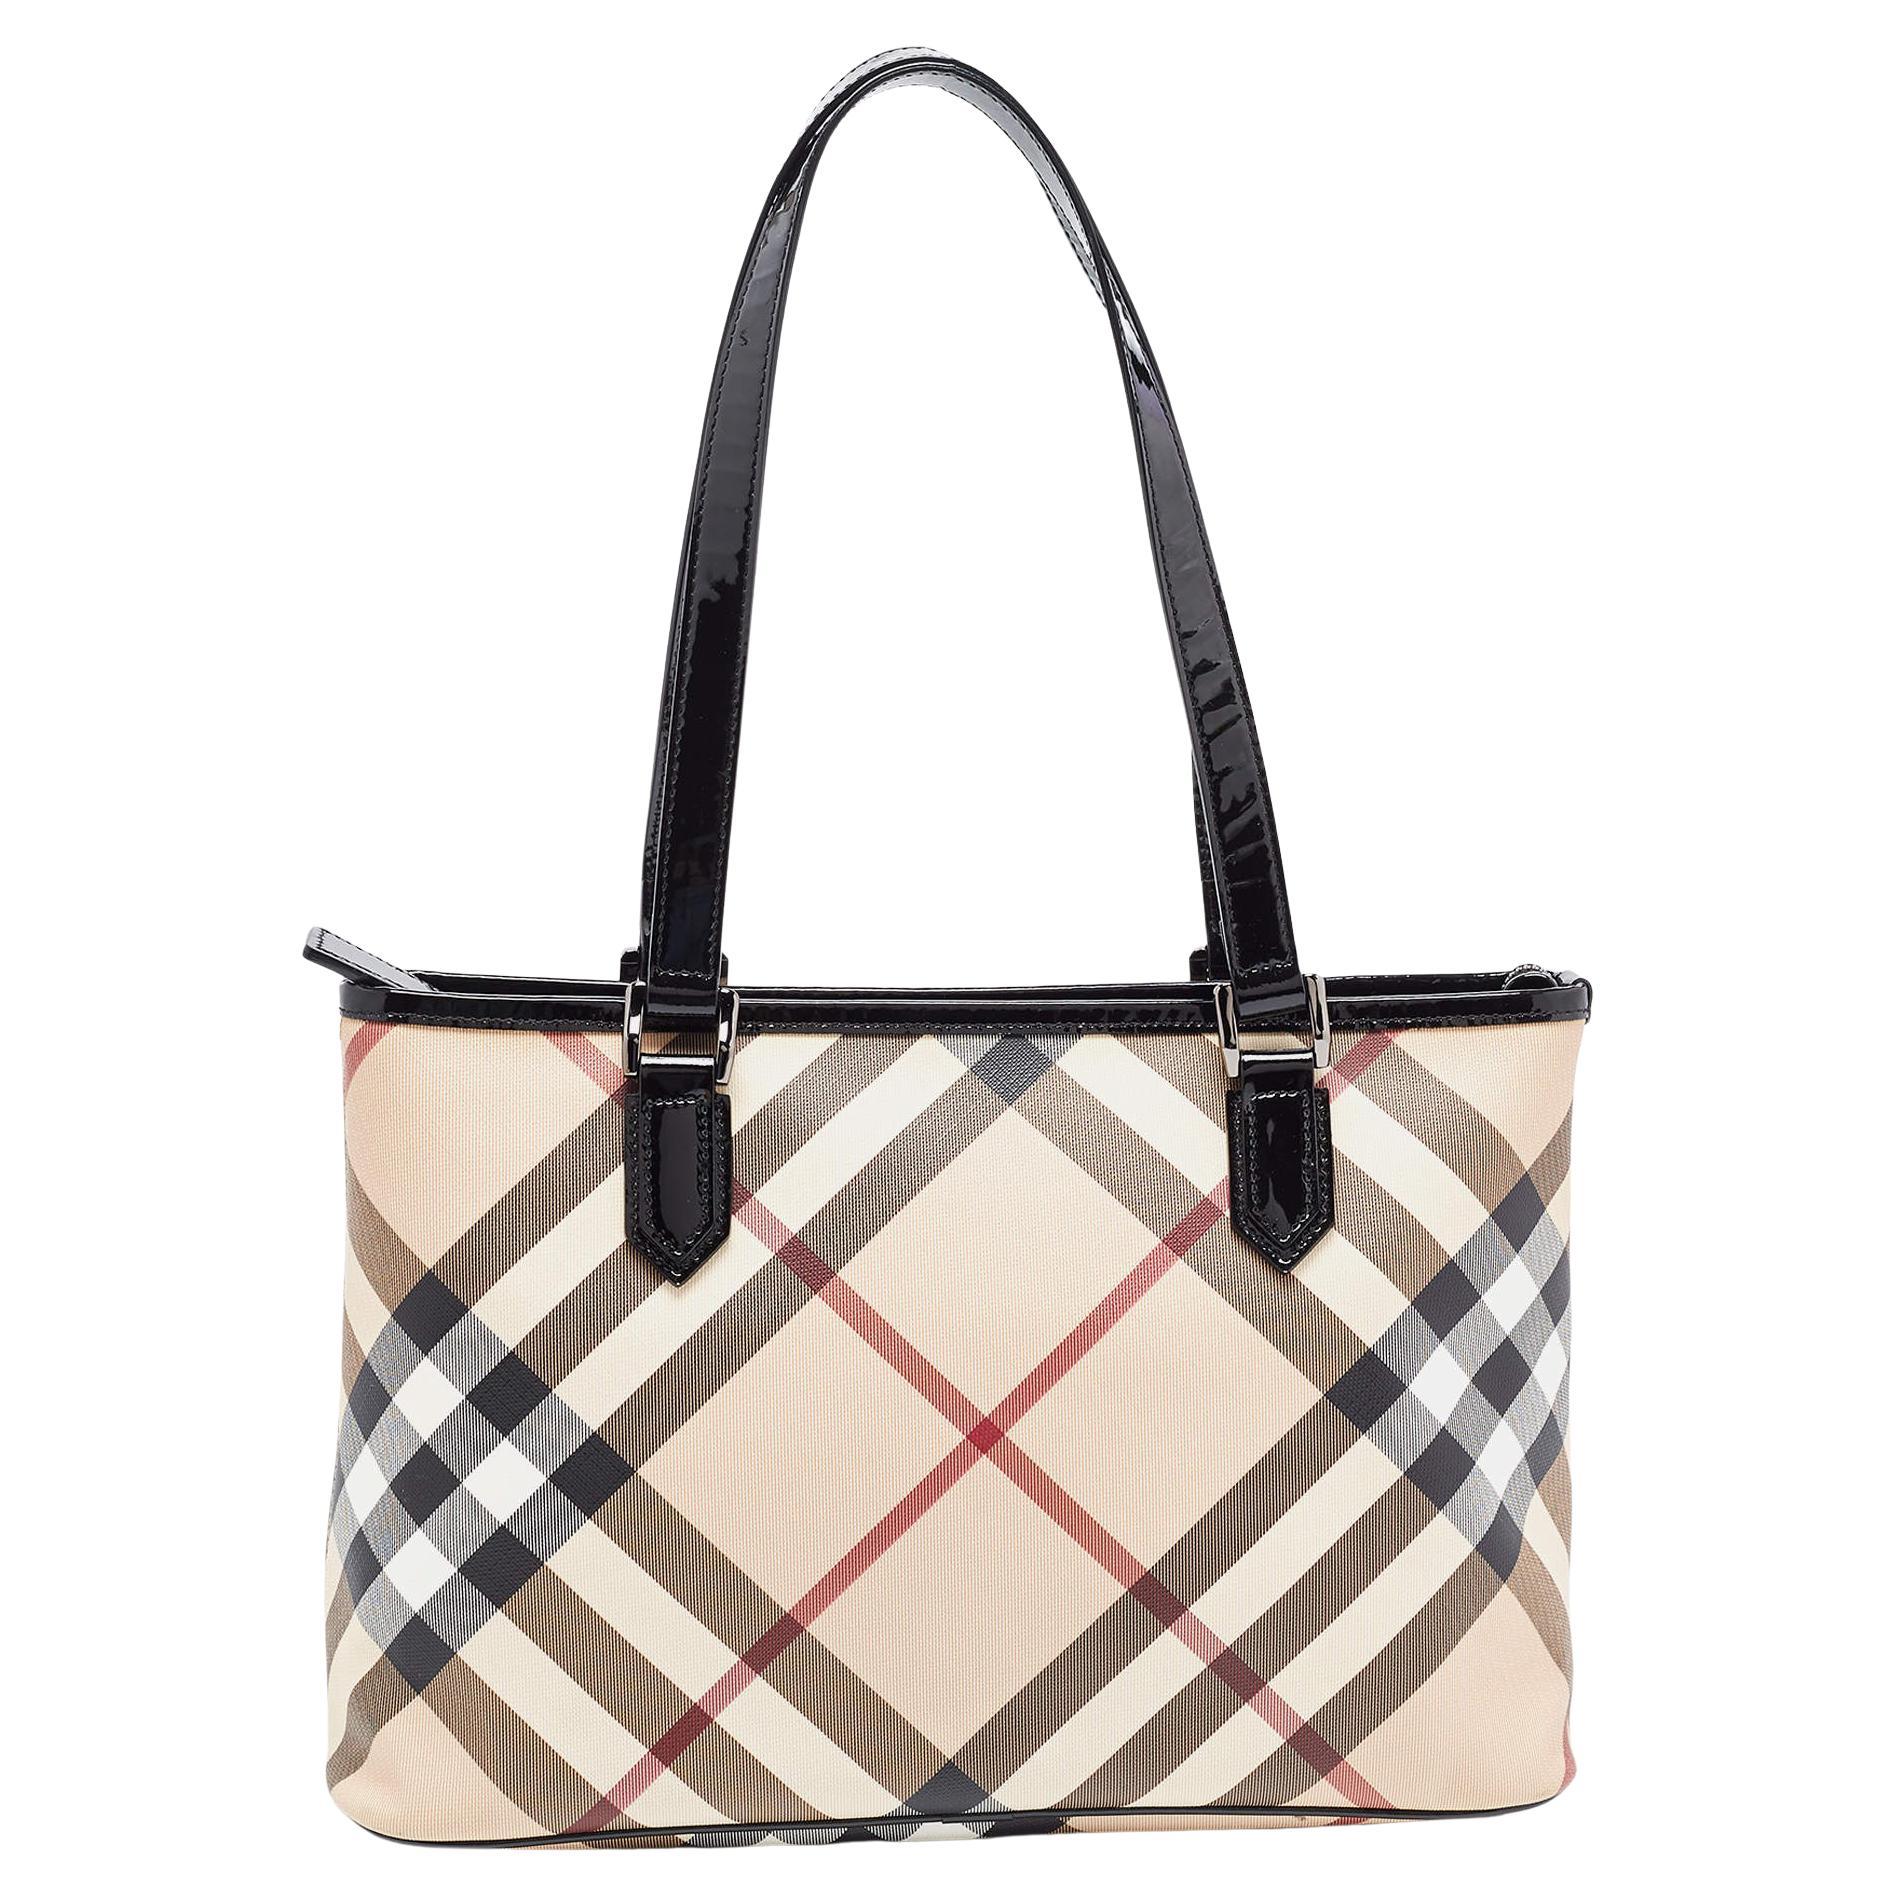 Burberry Black/Beige Super Nova Check PVC and Patent Leather Nickie Tote